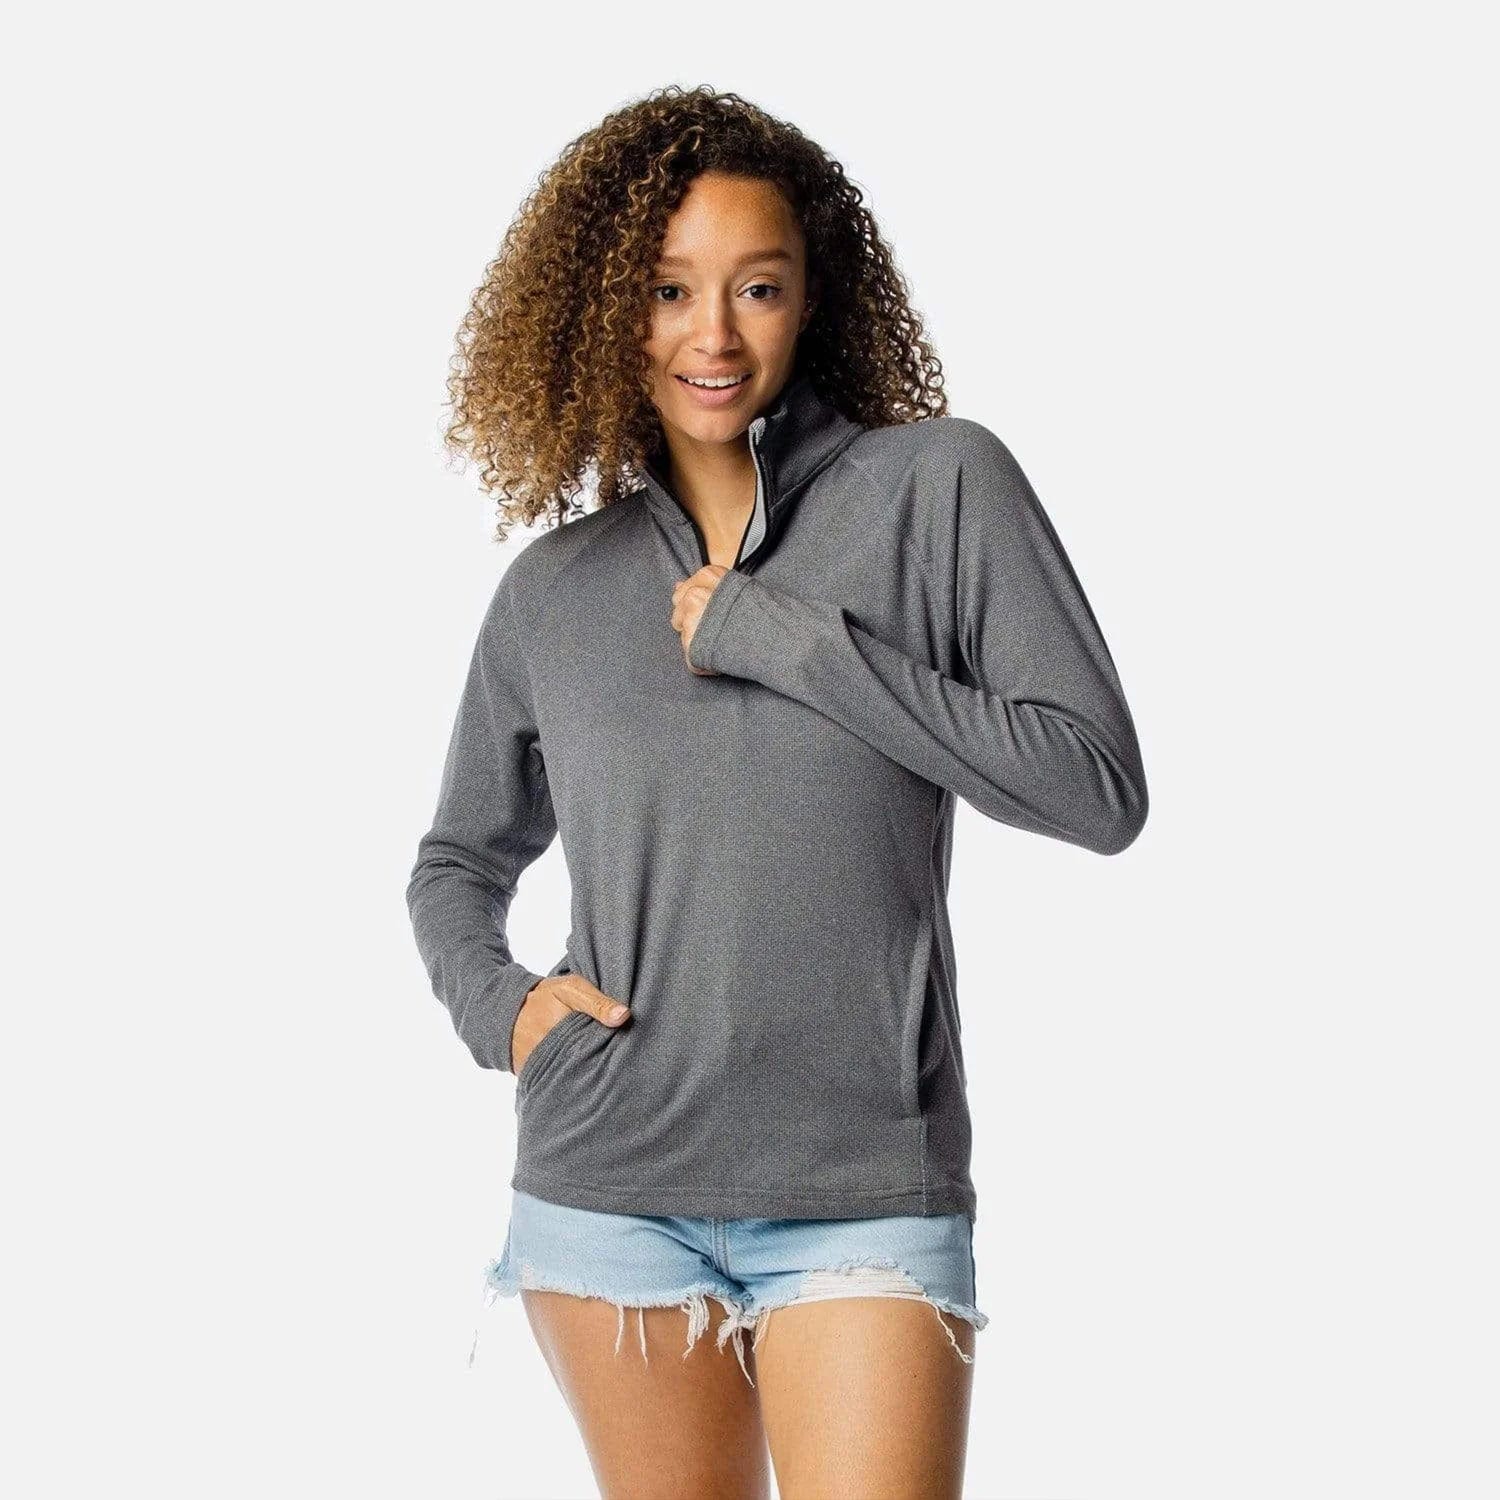 Women's 1/4 Zip Pullover, Performance Clothing